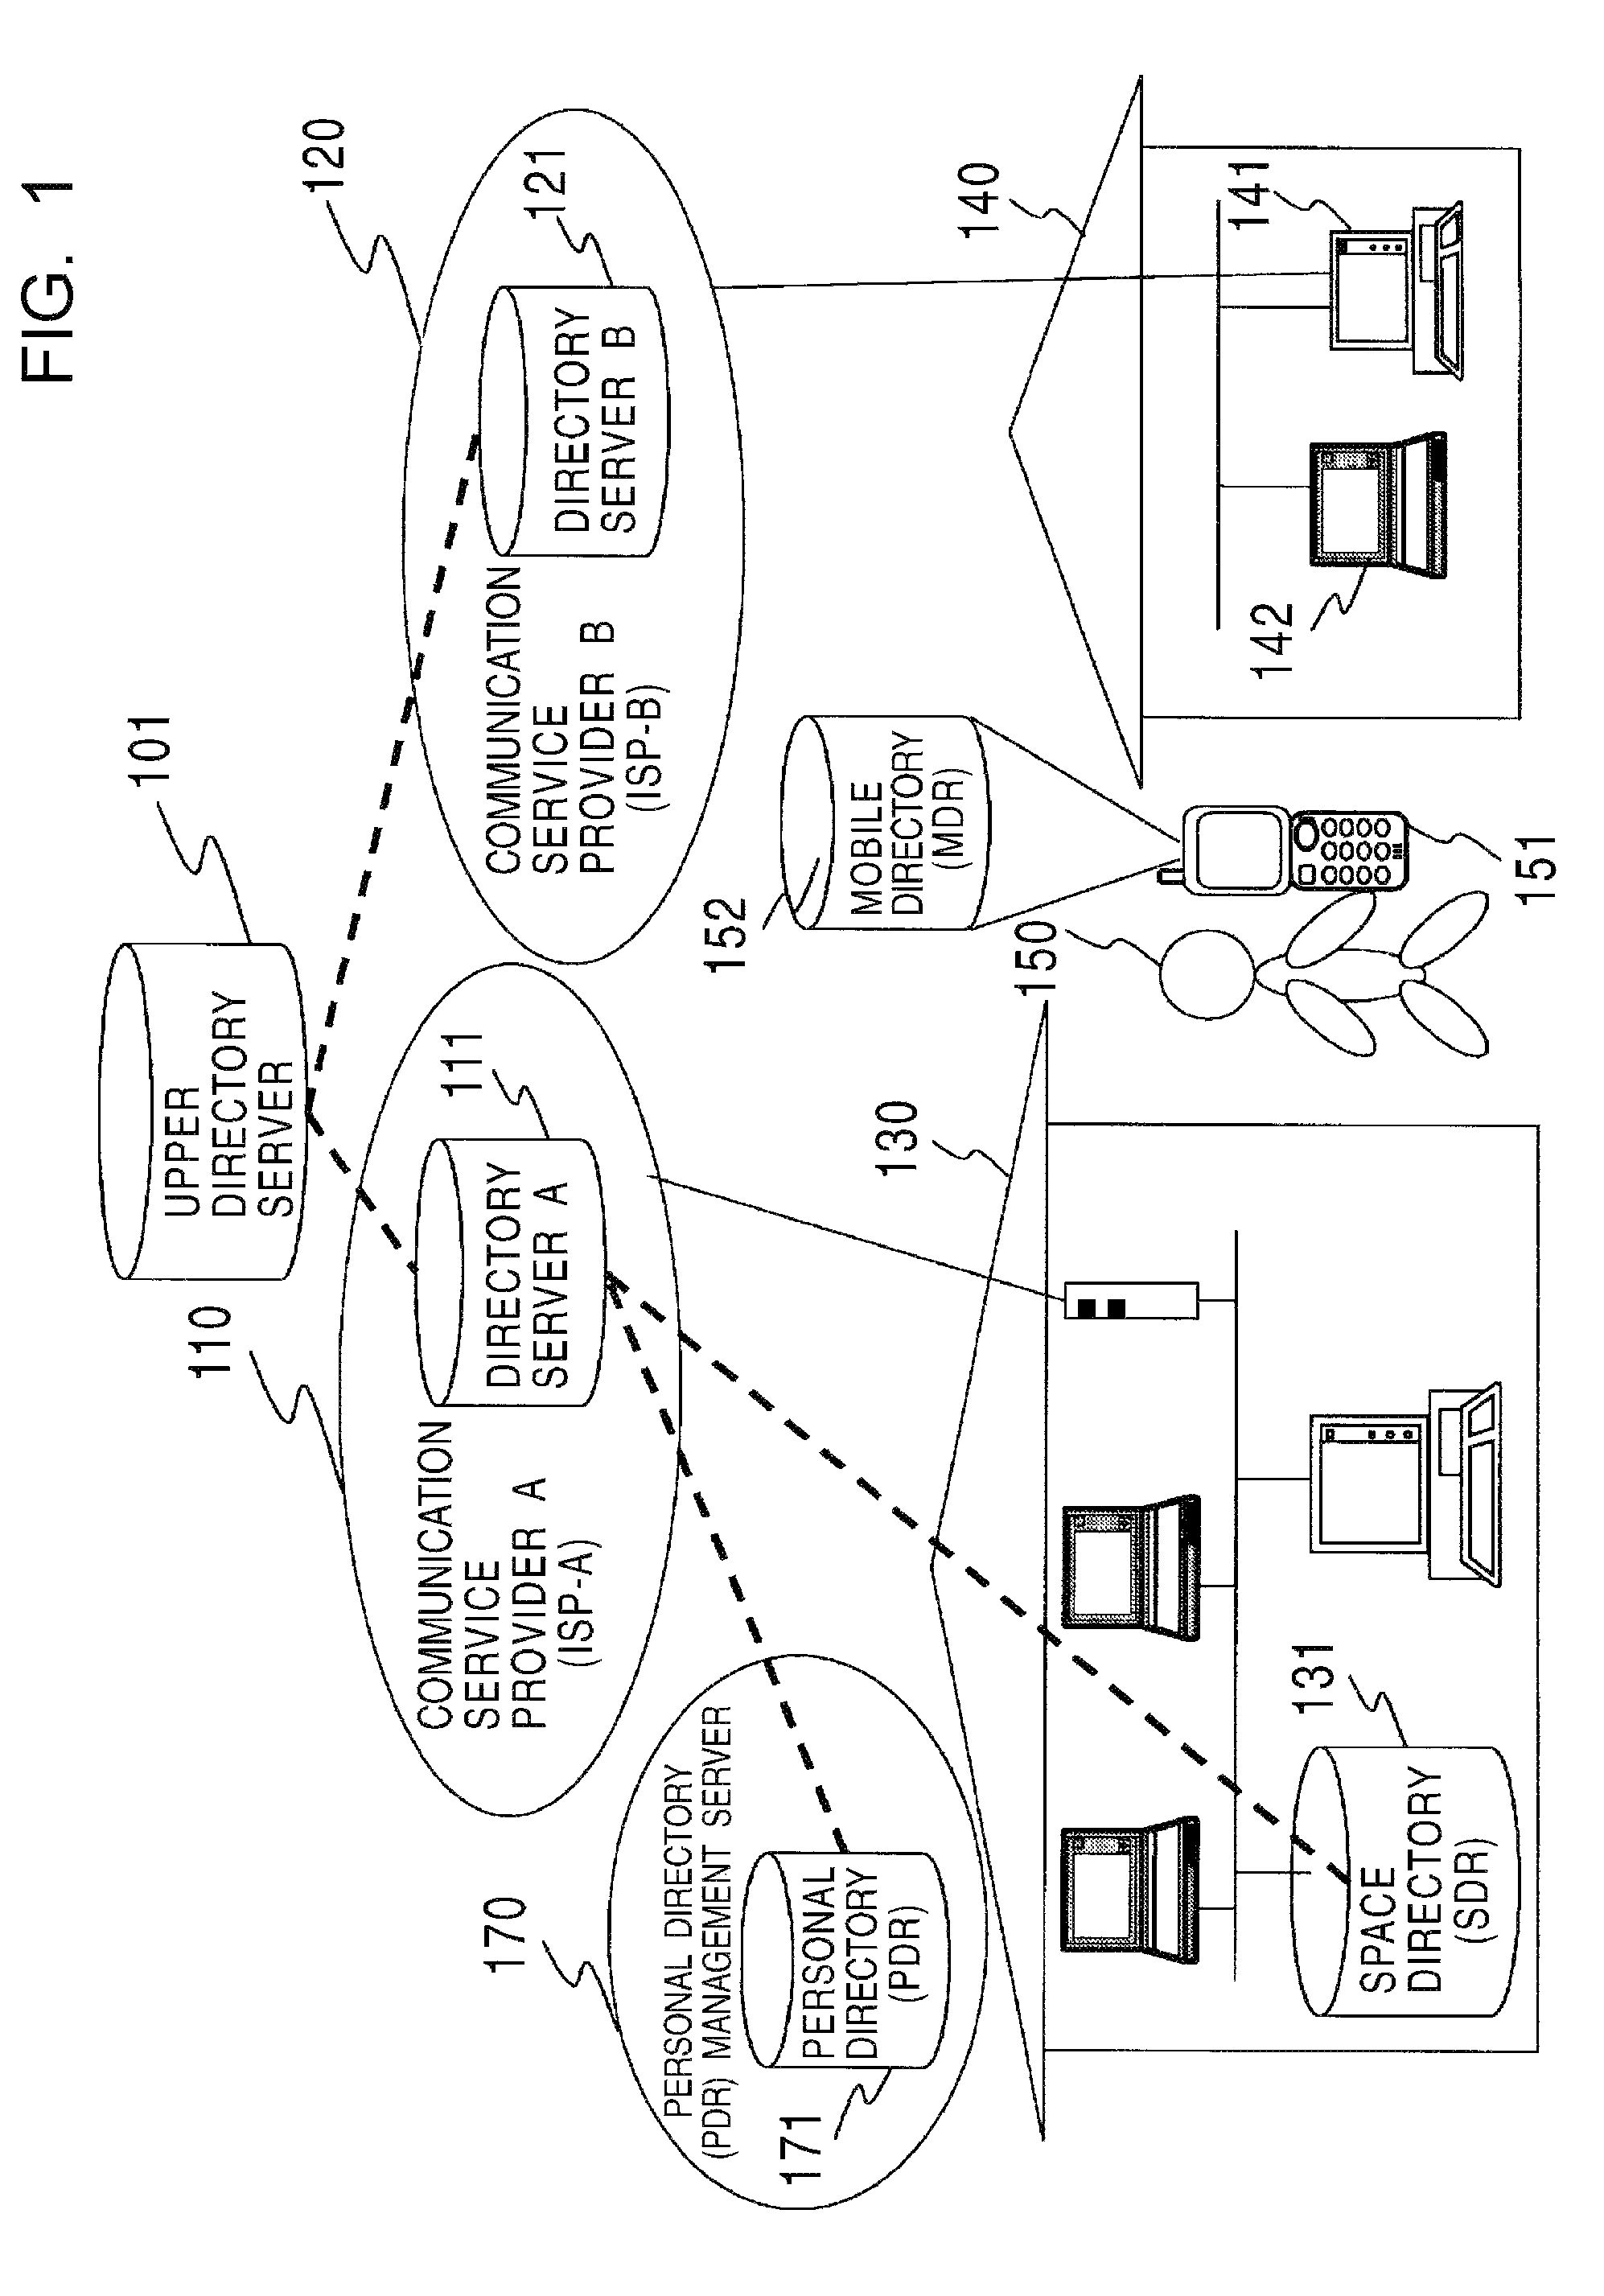 Information processing device, data processing system and method, and computer program